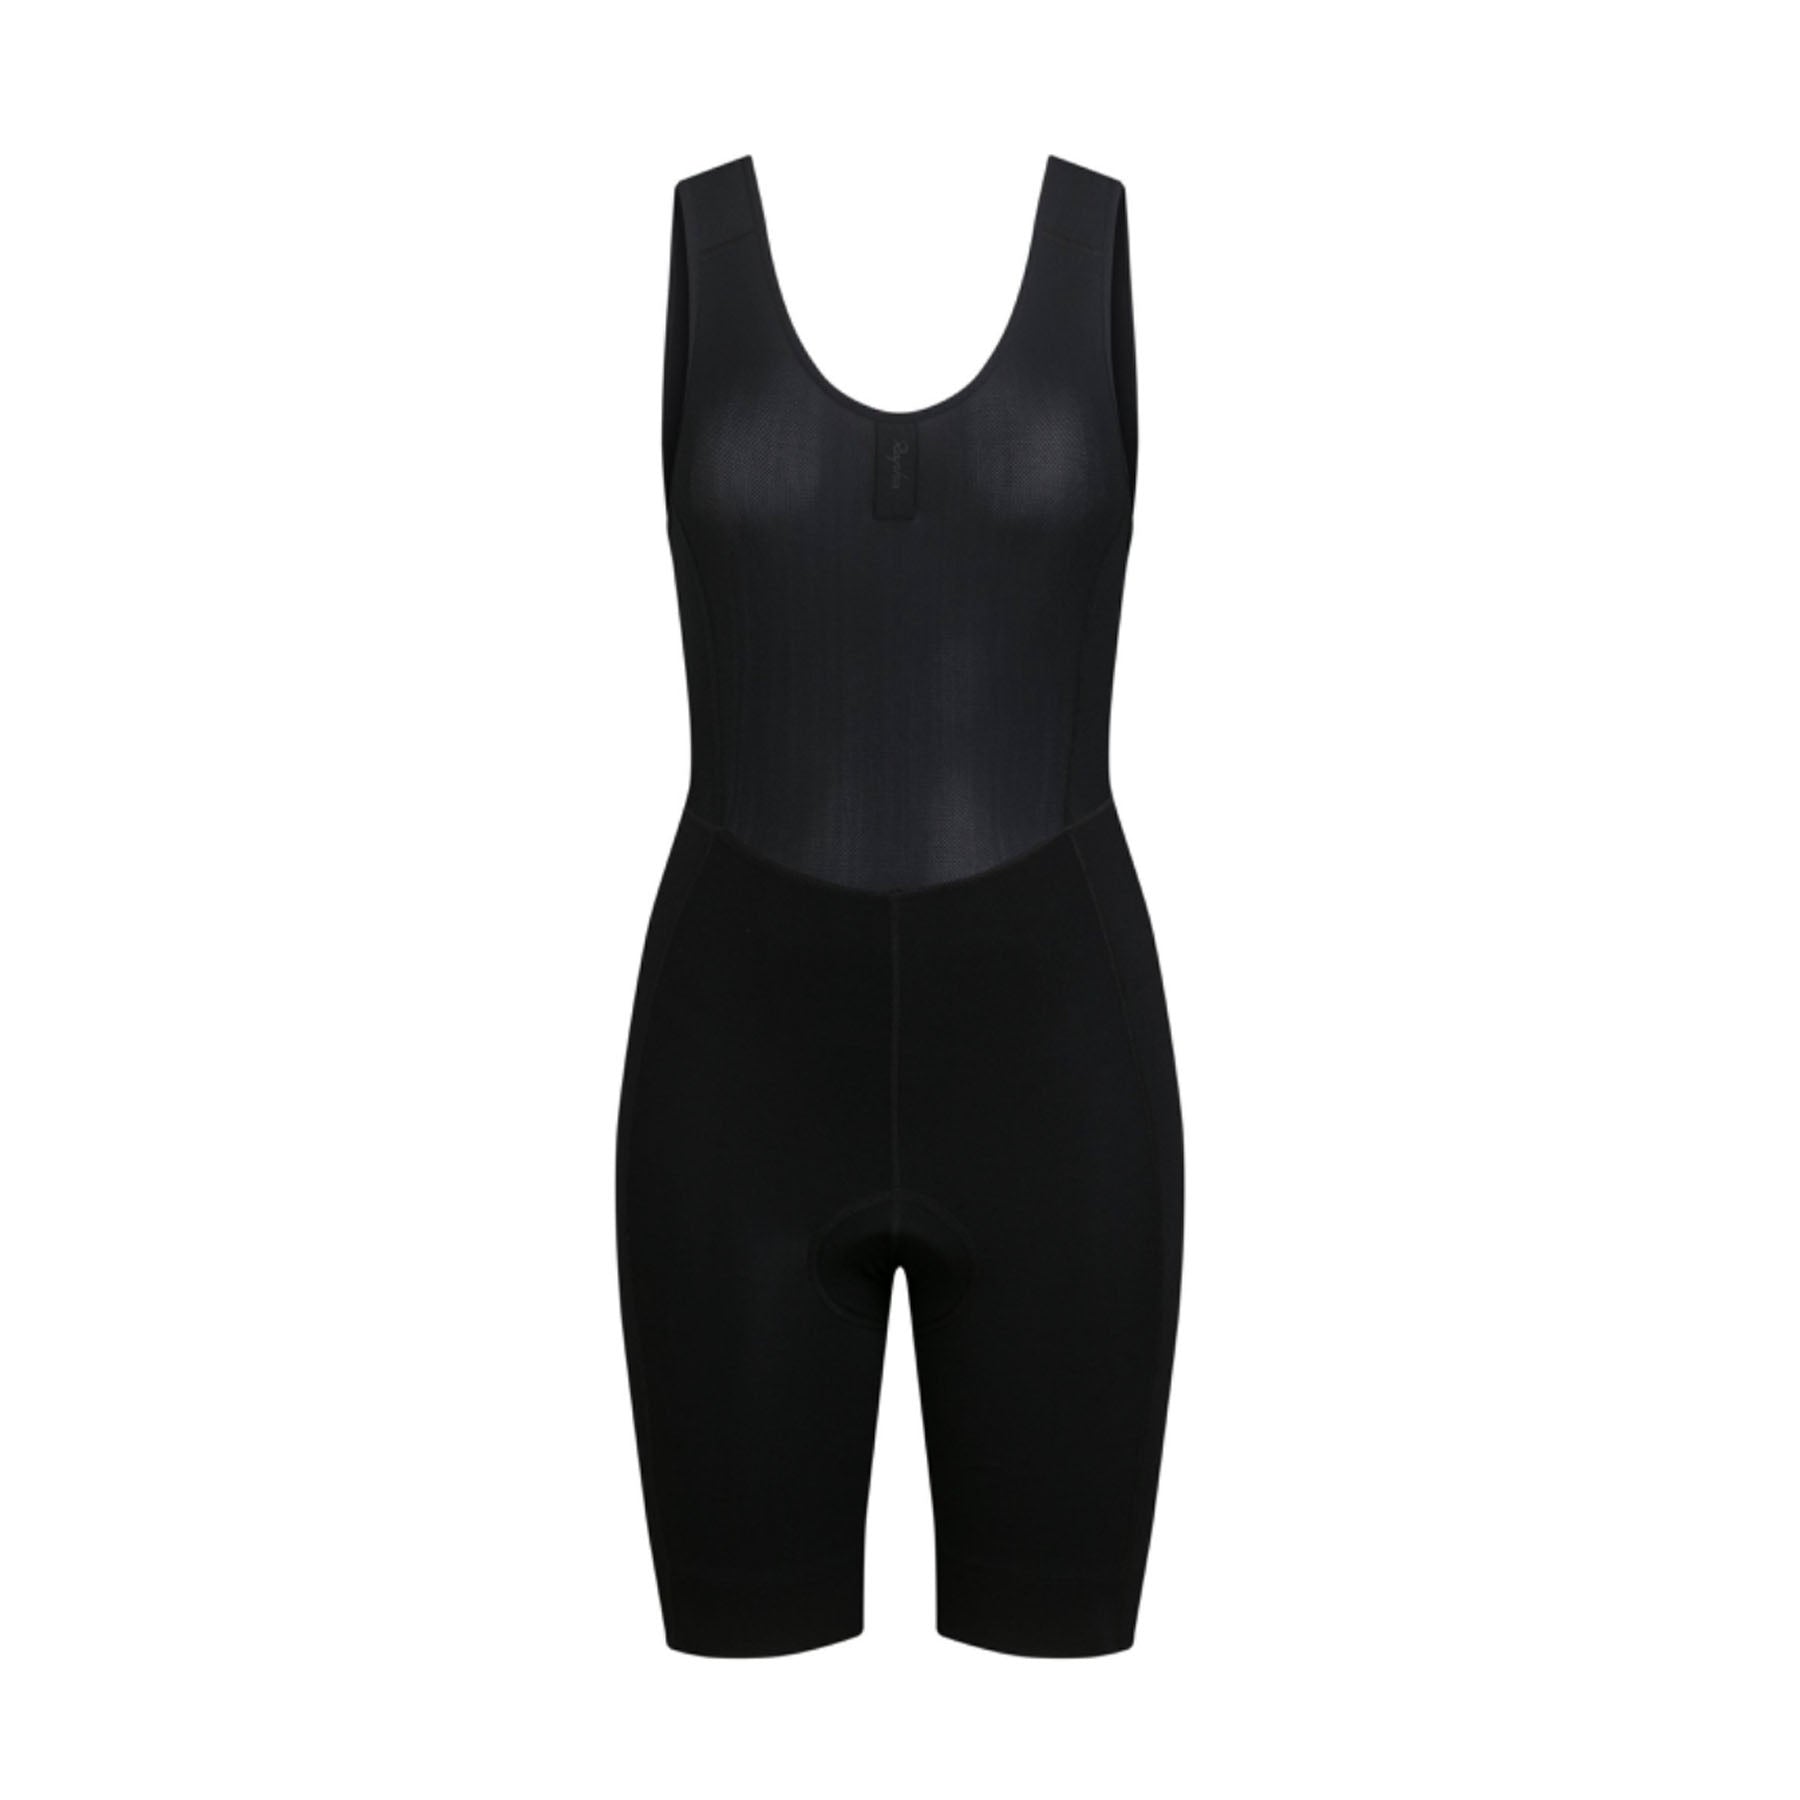 Hero image featuring the front of the Rapha Women's Classic Bib Short in all black